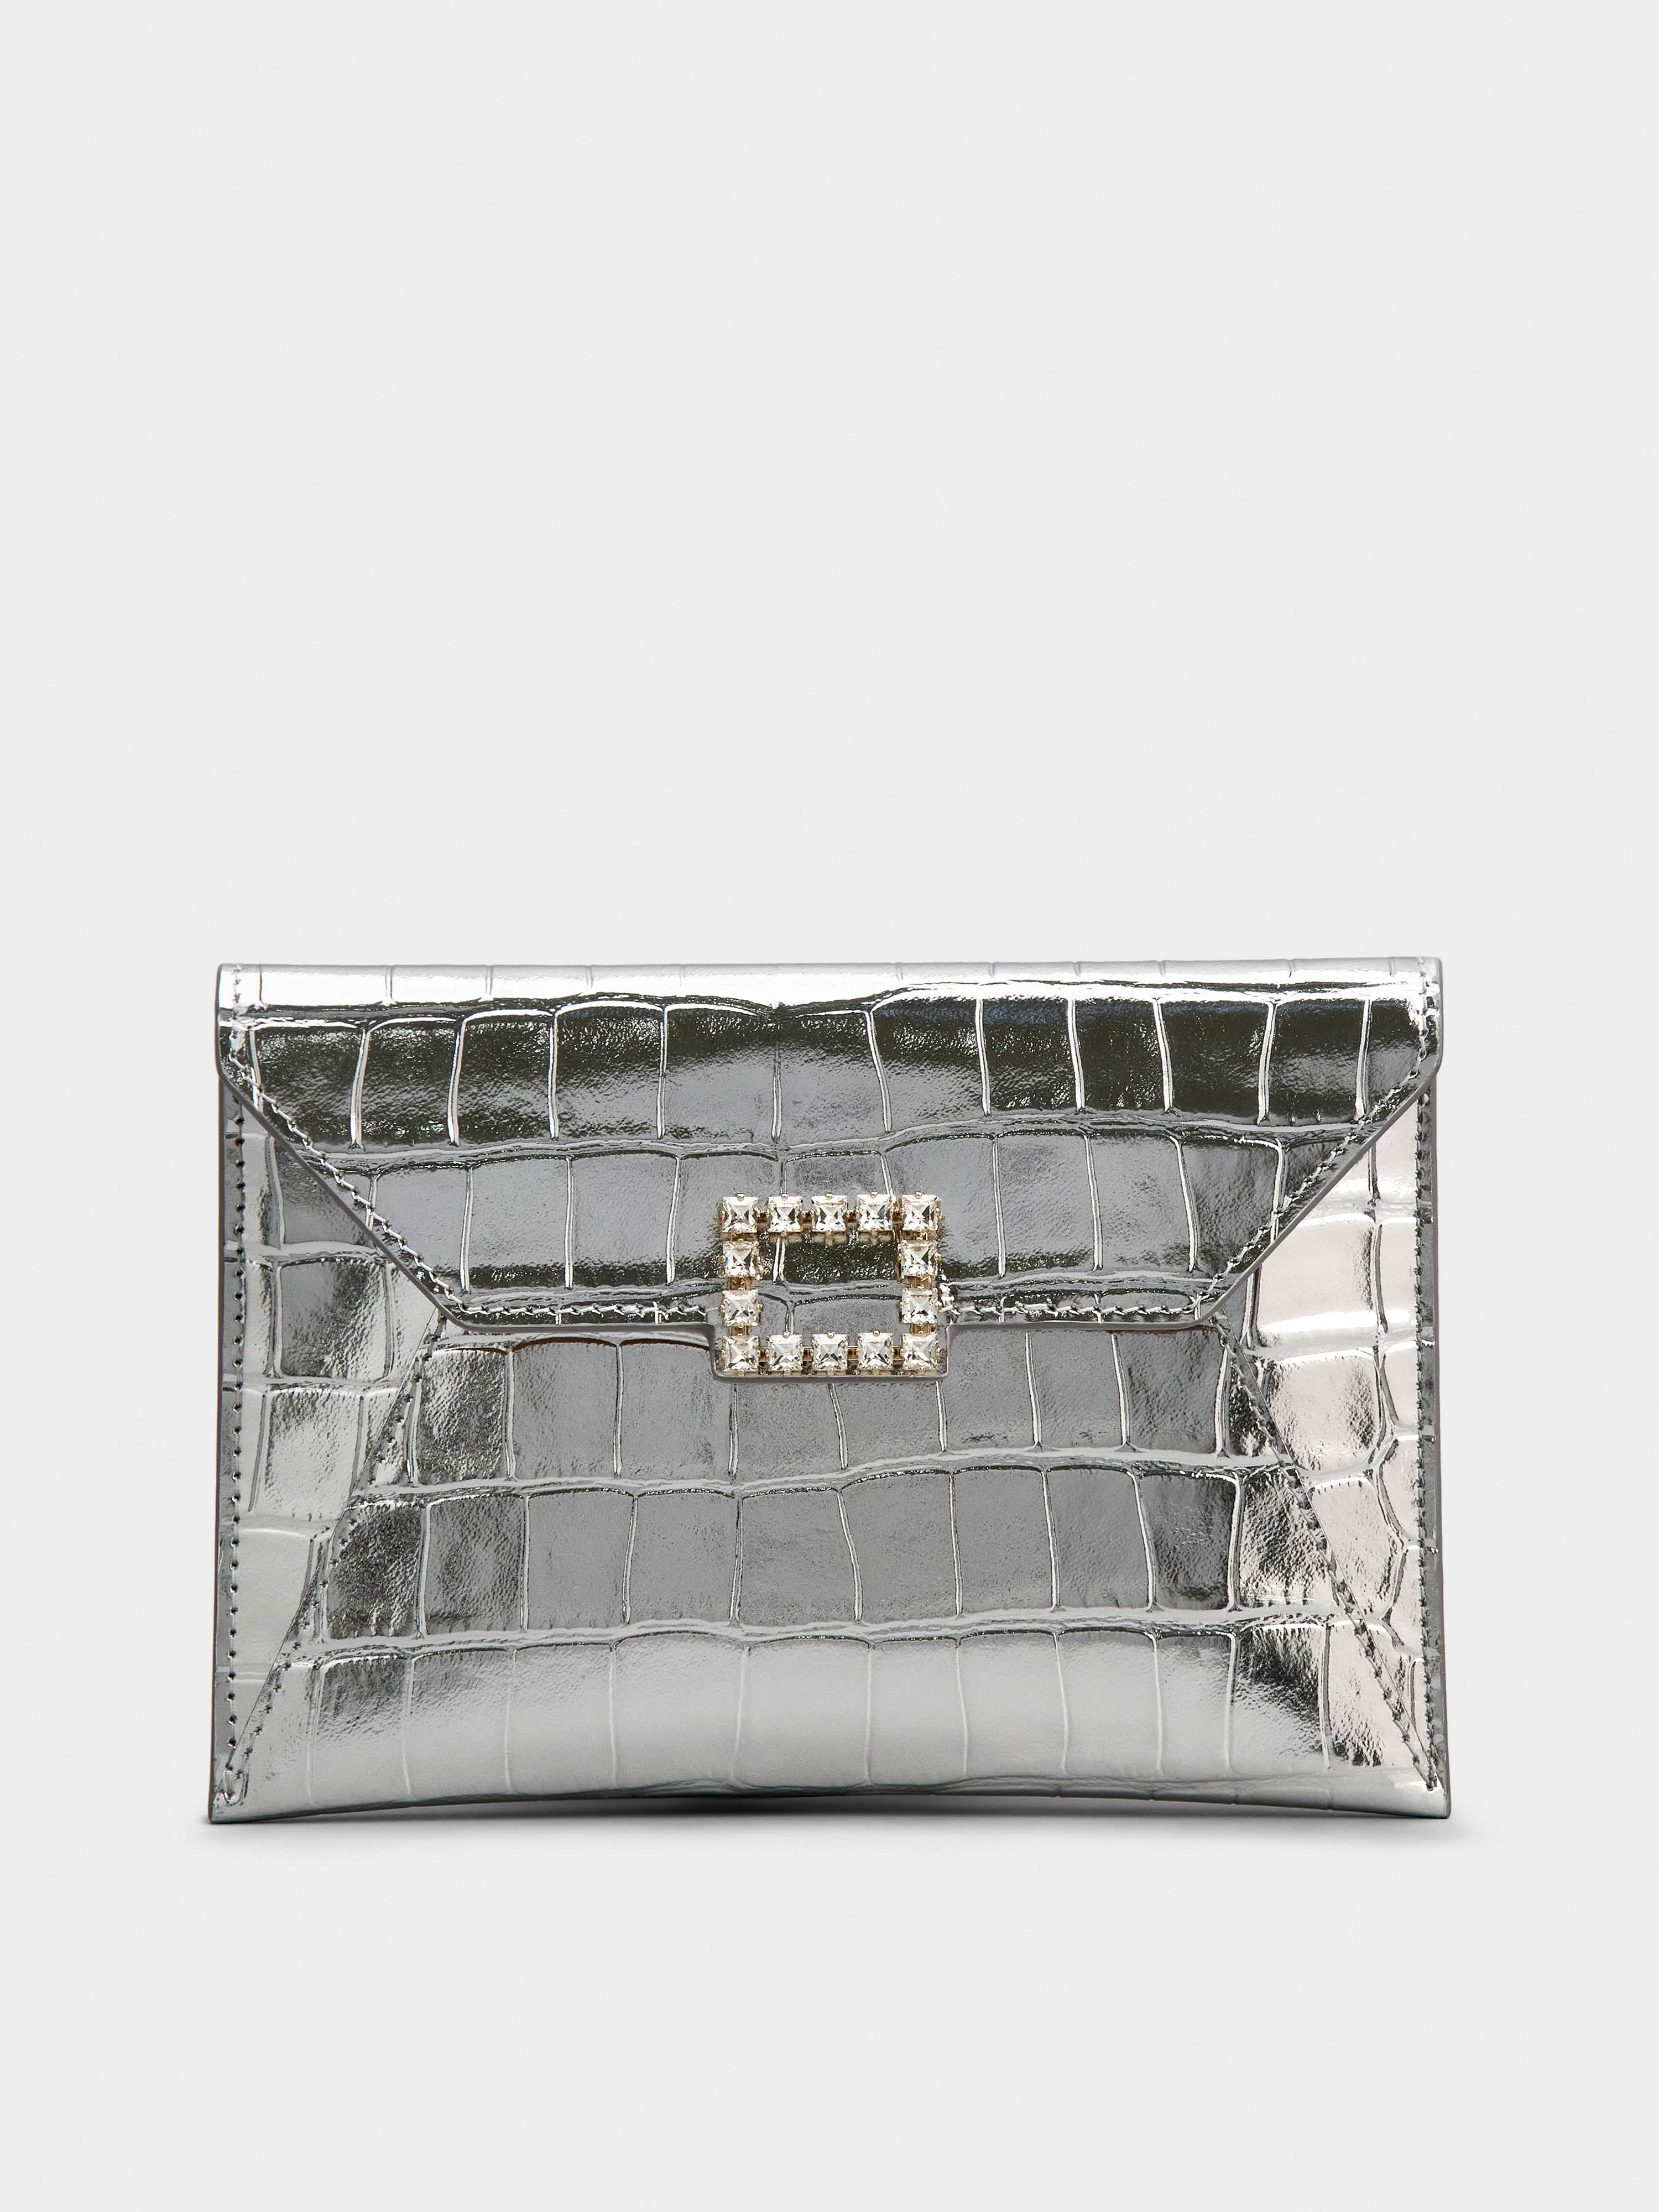 Très Vivier Strass Buckle Mini Clutch in Leather - 1